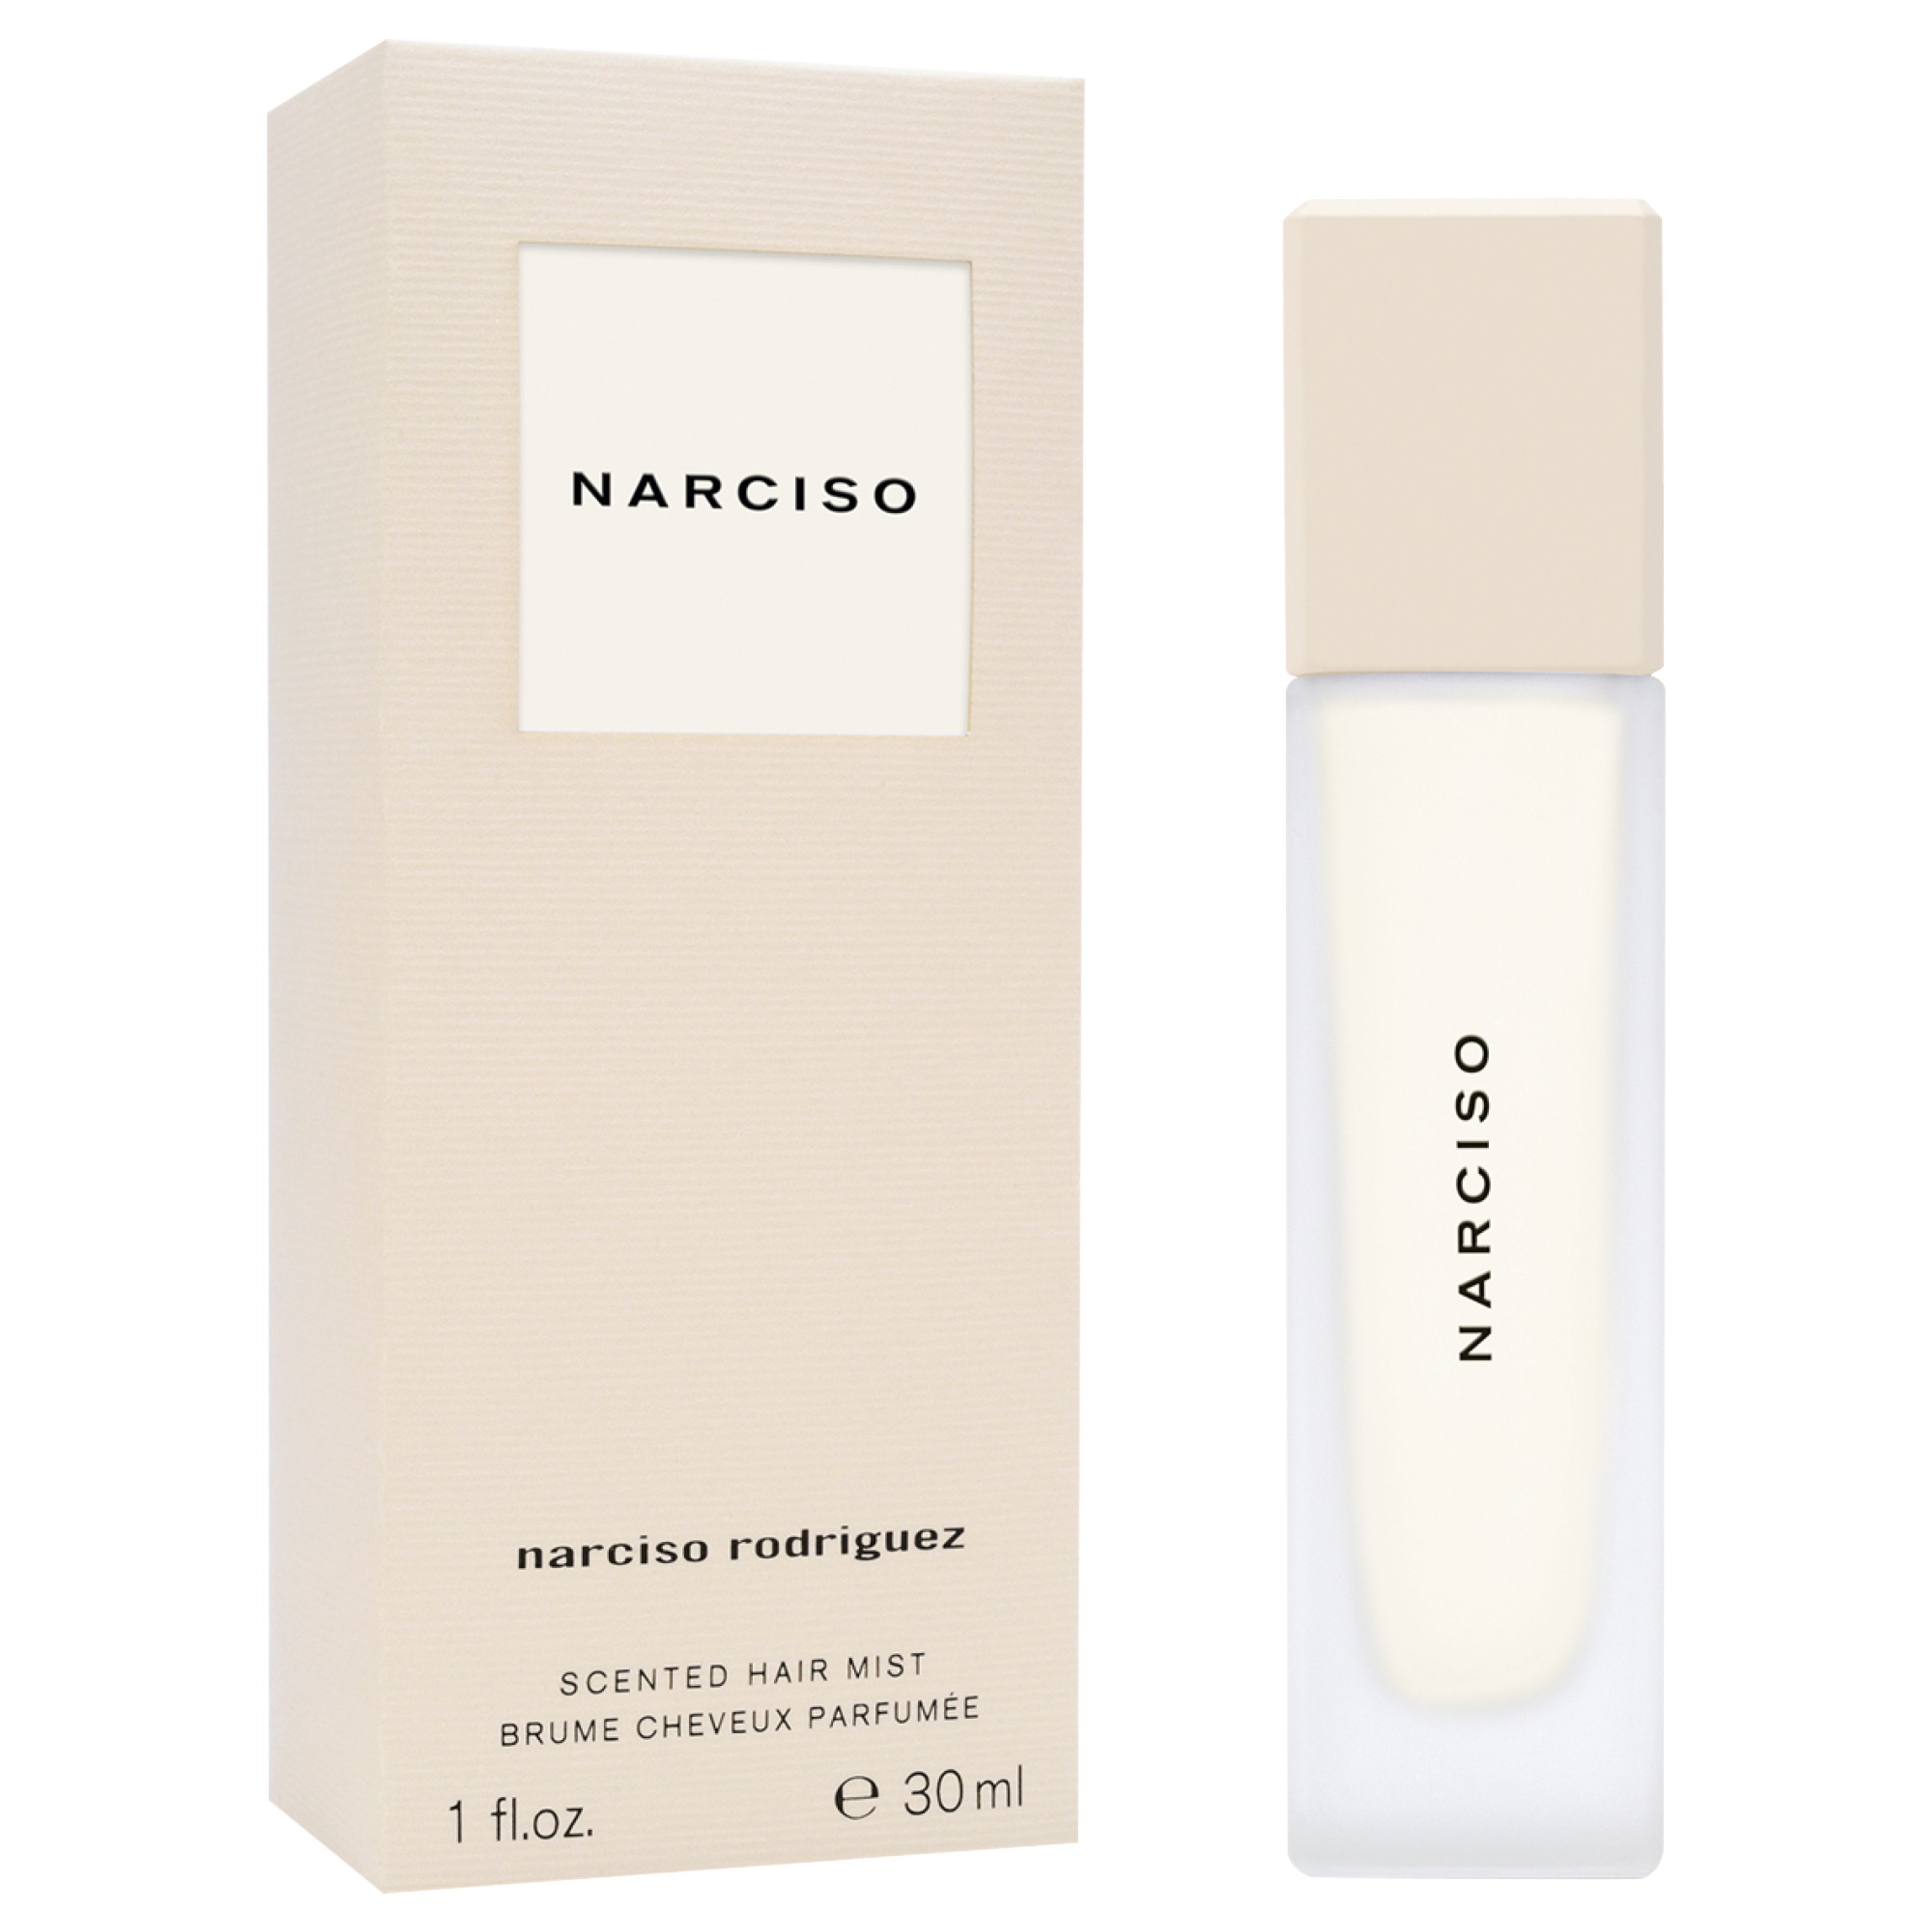 Narciso Rodriguez Scented Hair Mist 30ml 2